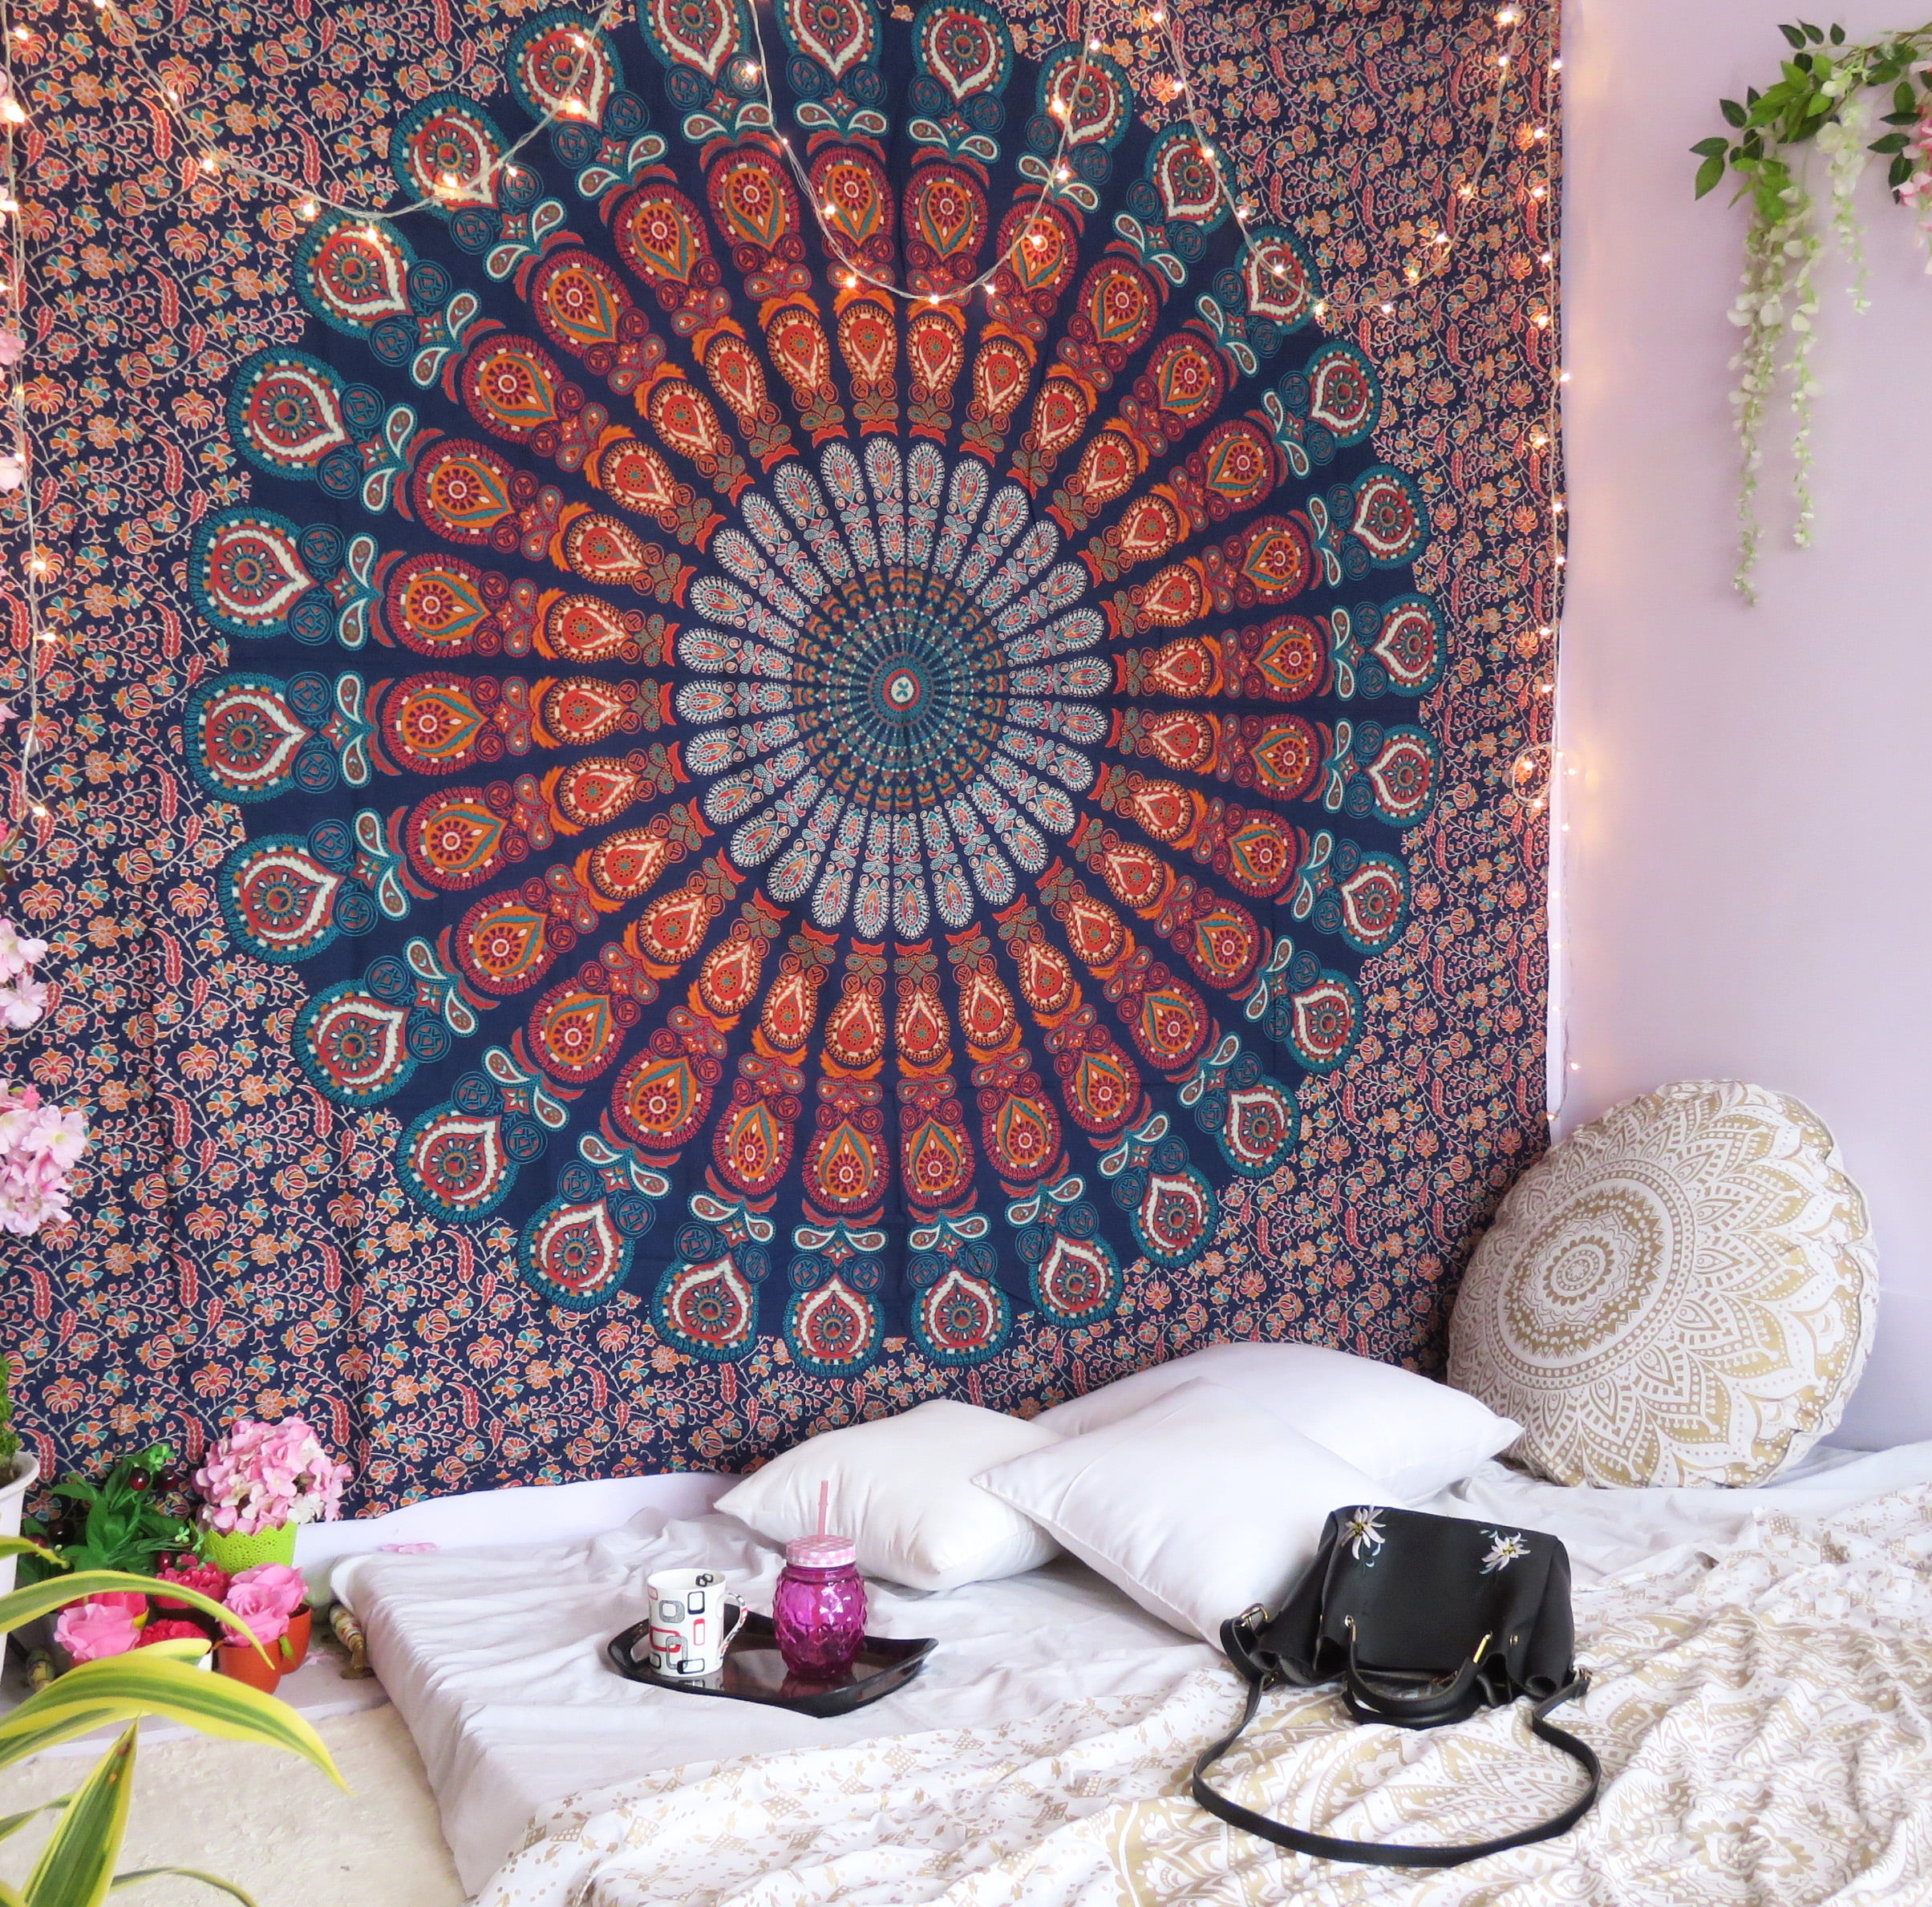 Decorative Tapestry Sun Moon Hippie Hippy Tapestry Wall Hanging Decor Indian Tapestries Hippie Print Tapestry Picnic Beach Sheet Table Cloth G